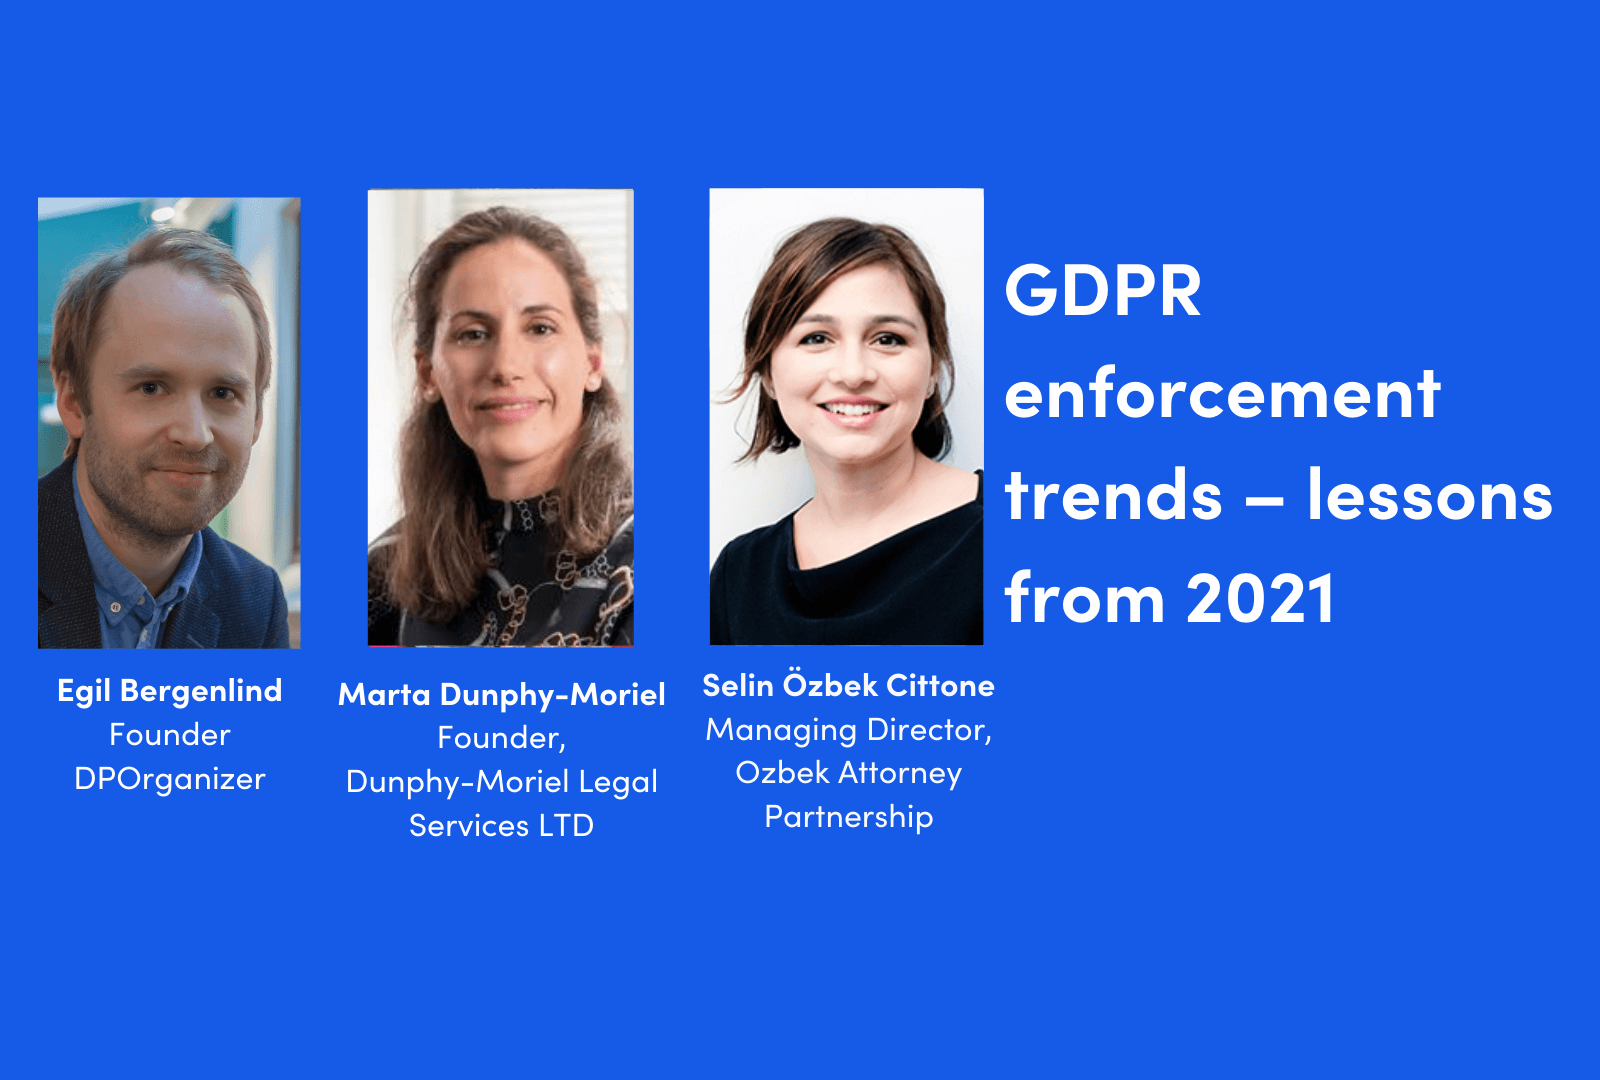 GDPR enforcement trends – lessons from 2021